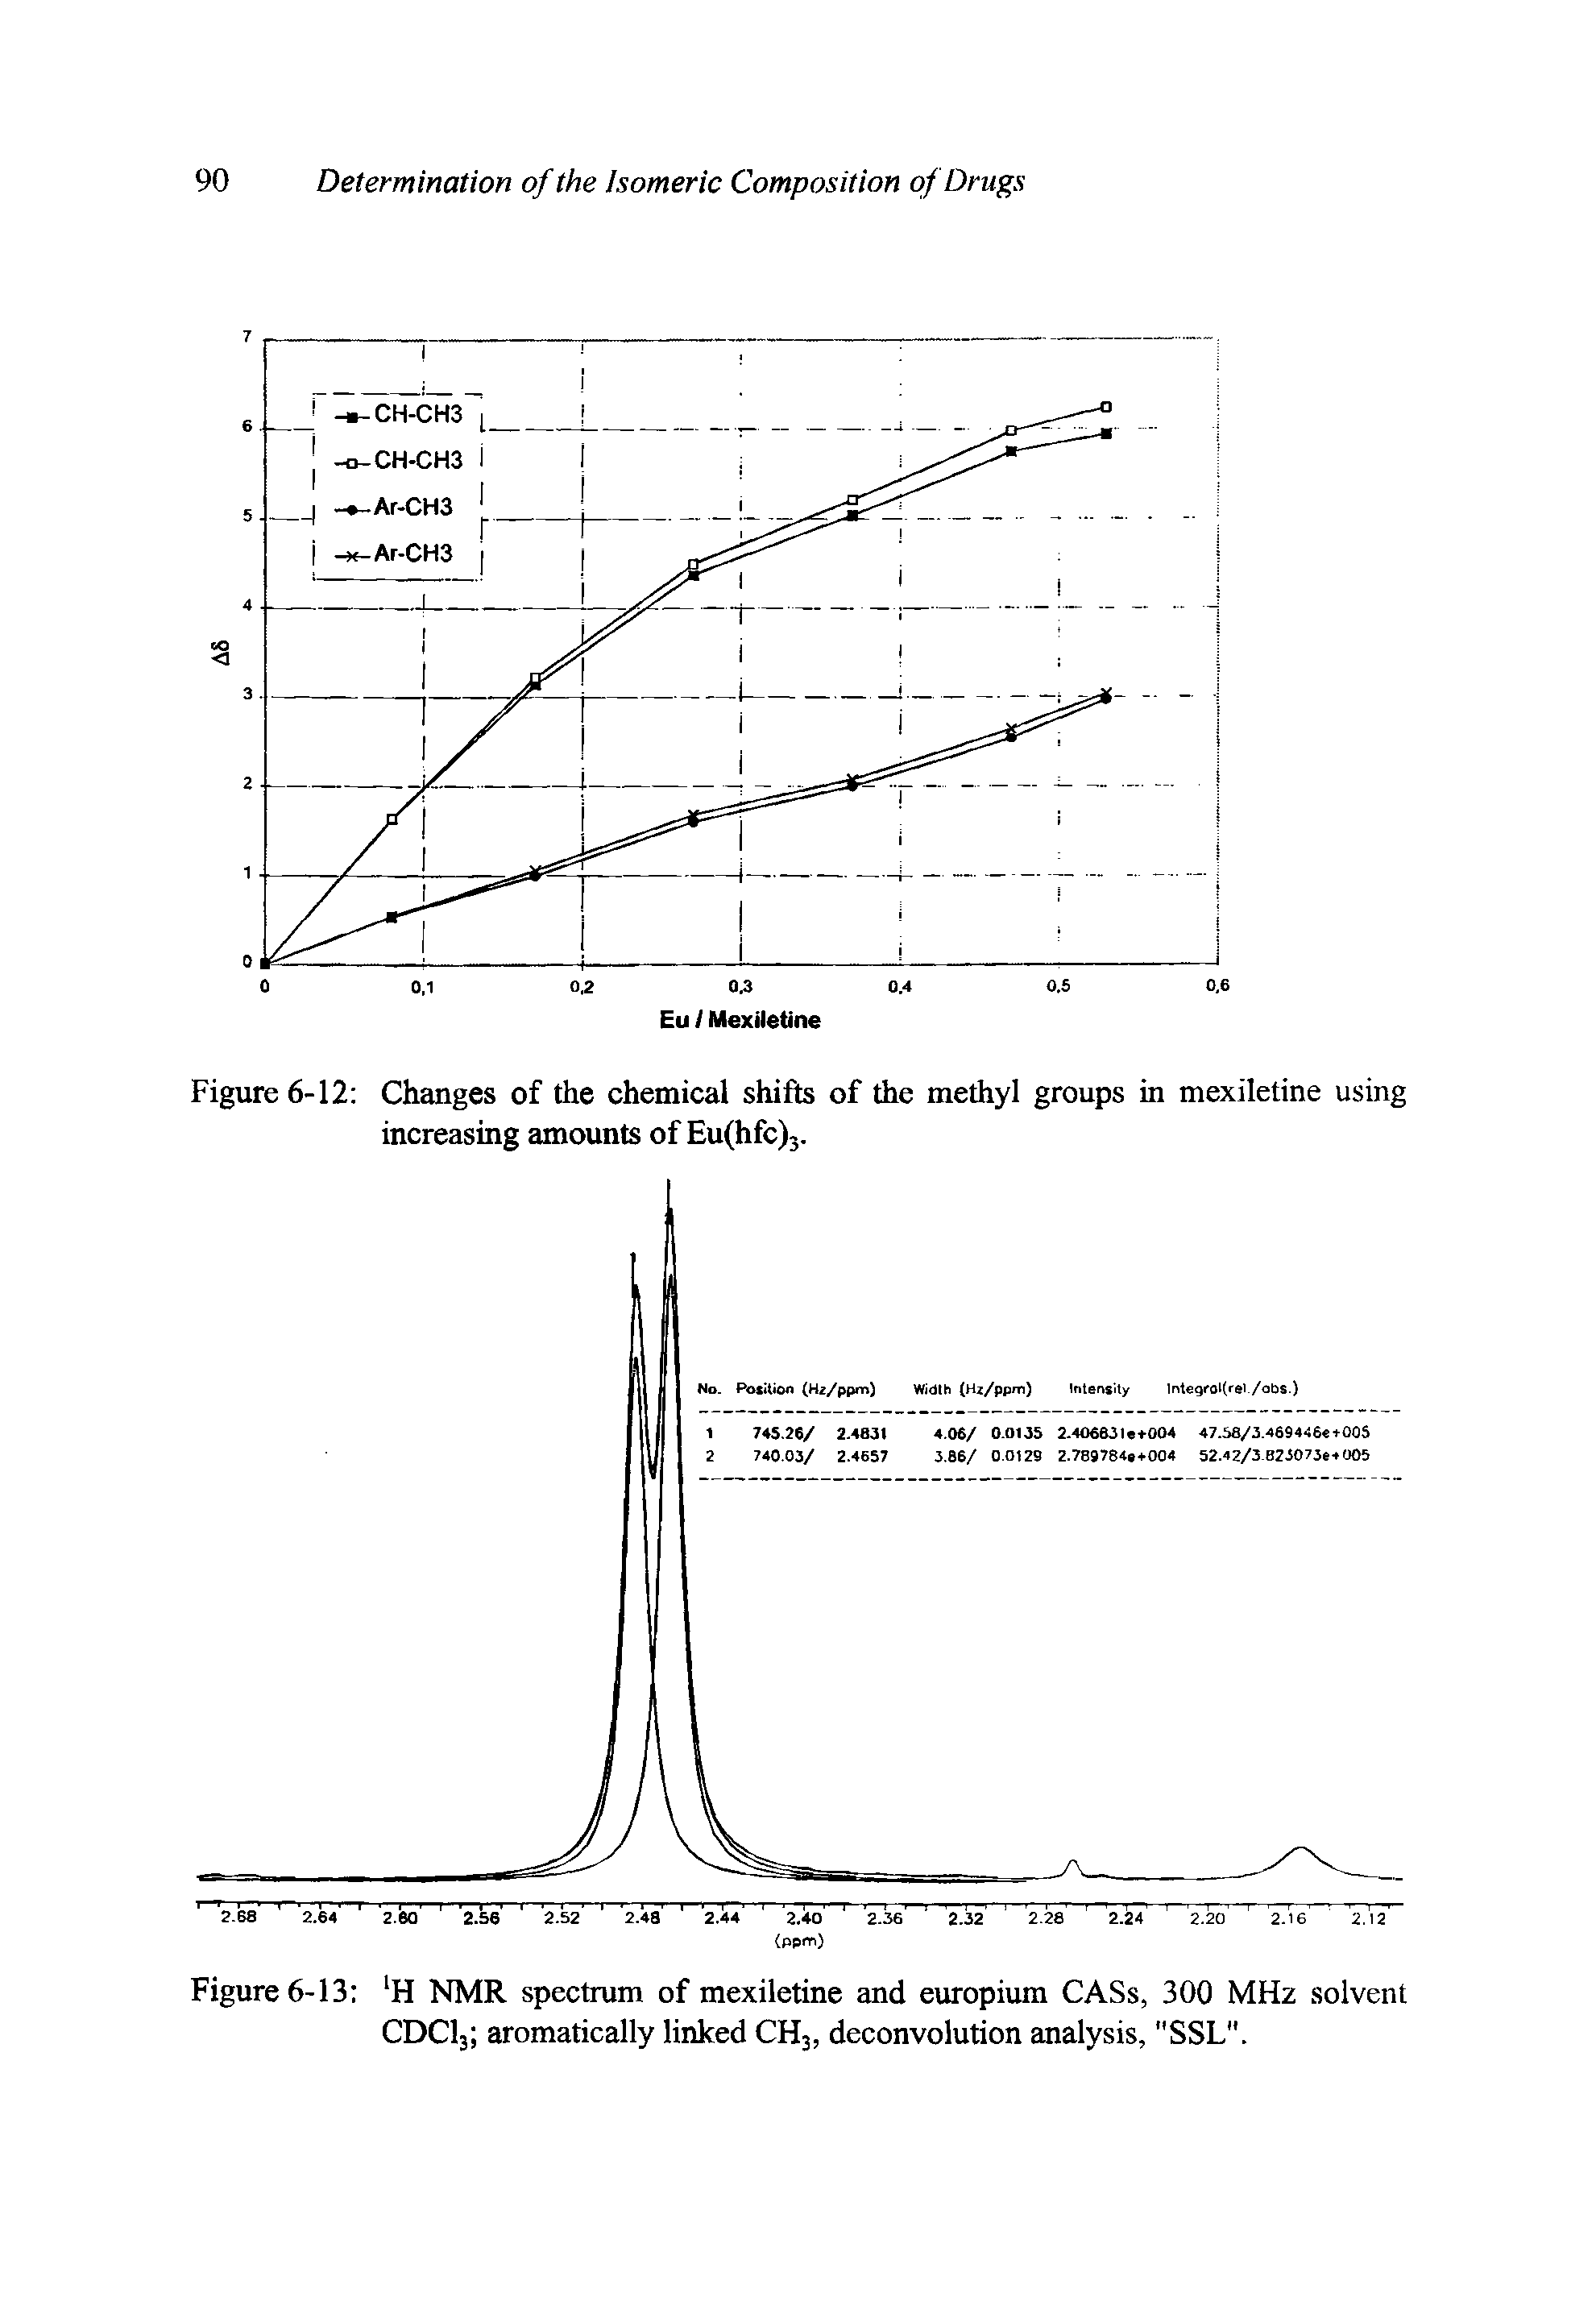 Figure 6-13 H NMR spectrum of mexiletine and europium CASs, 300 MHz solvent CDCl, aromatically linked CHj, deconvolution analysis, "SSL".